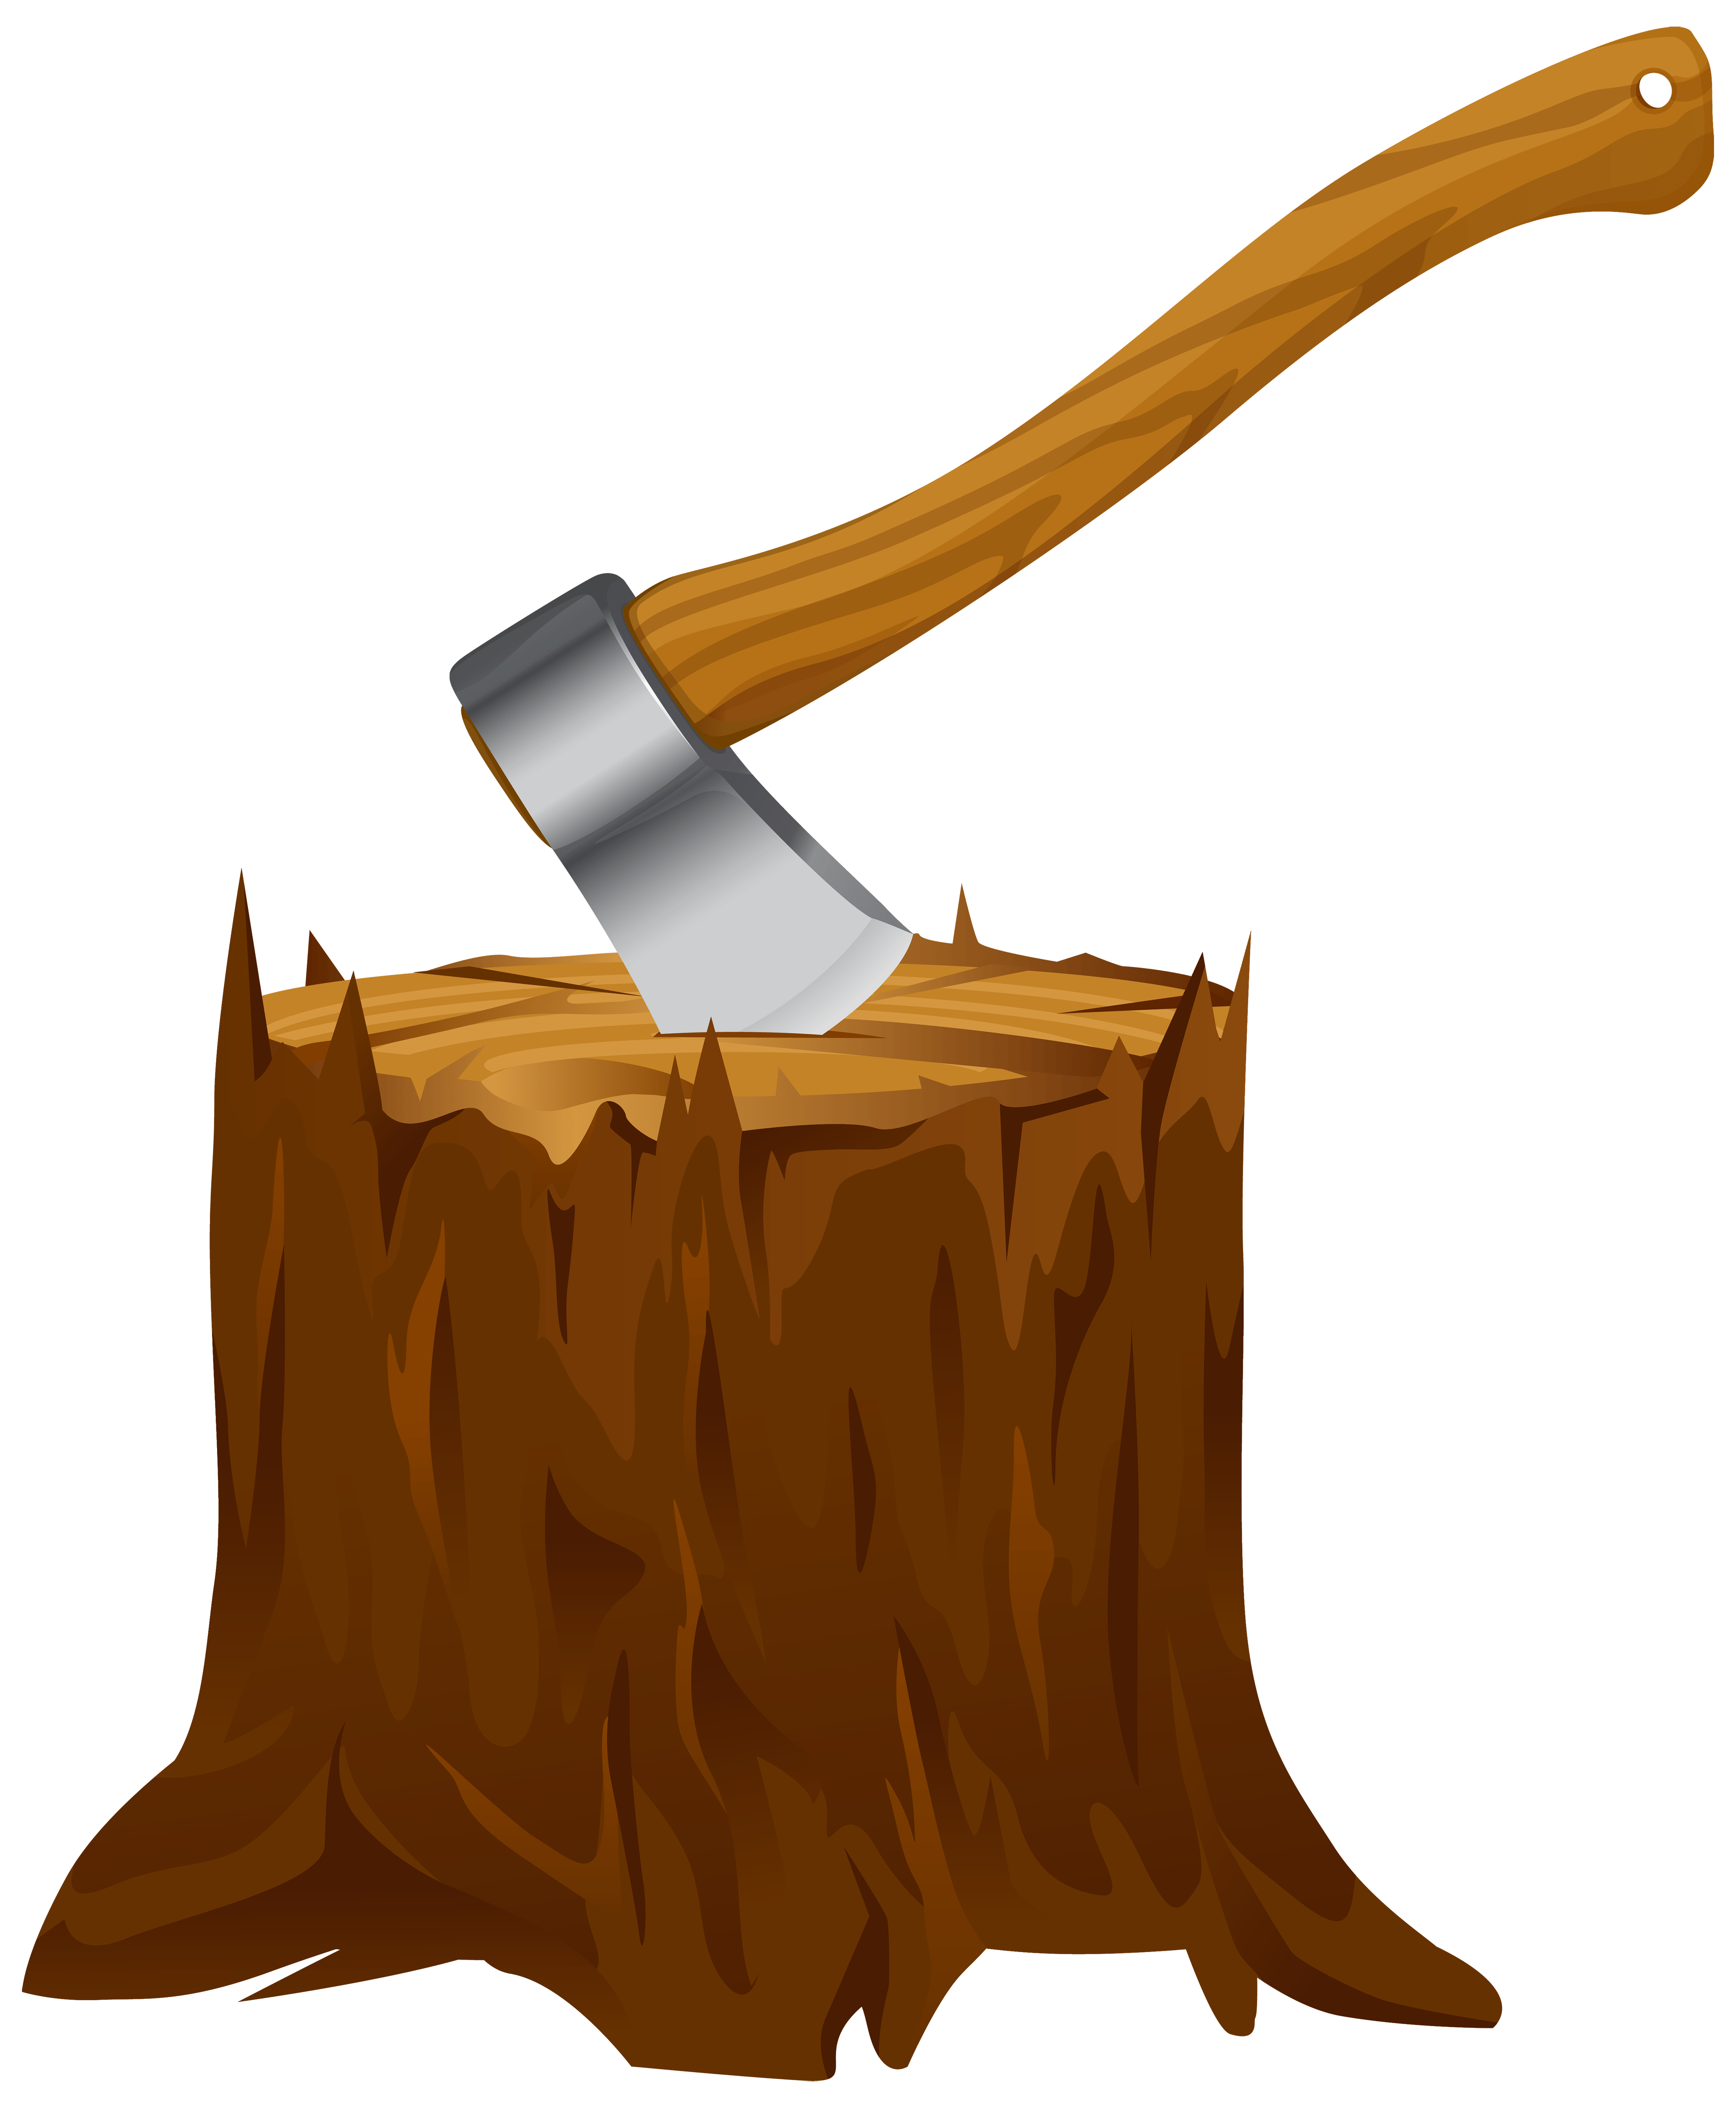 Free Tree Stump Cliparts, Download Free Tree Stump Cliparts png images